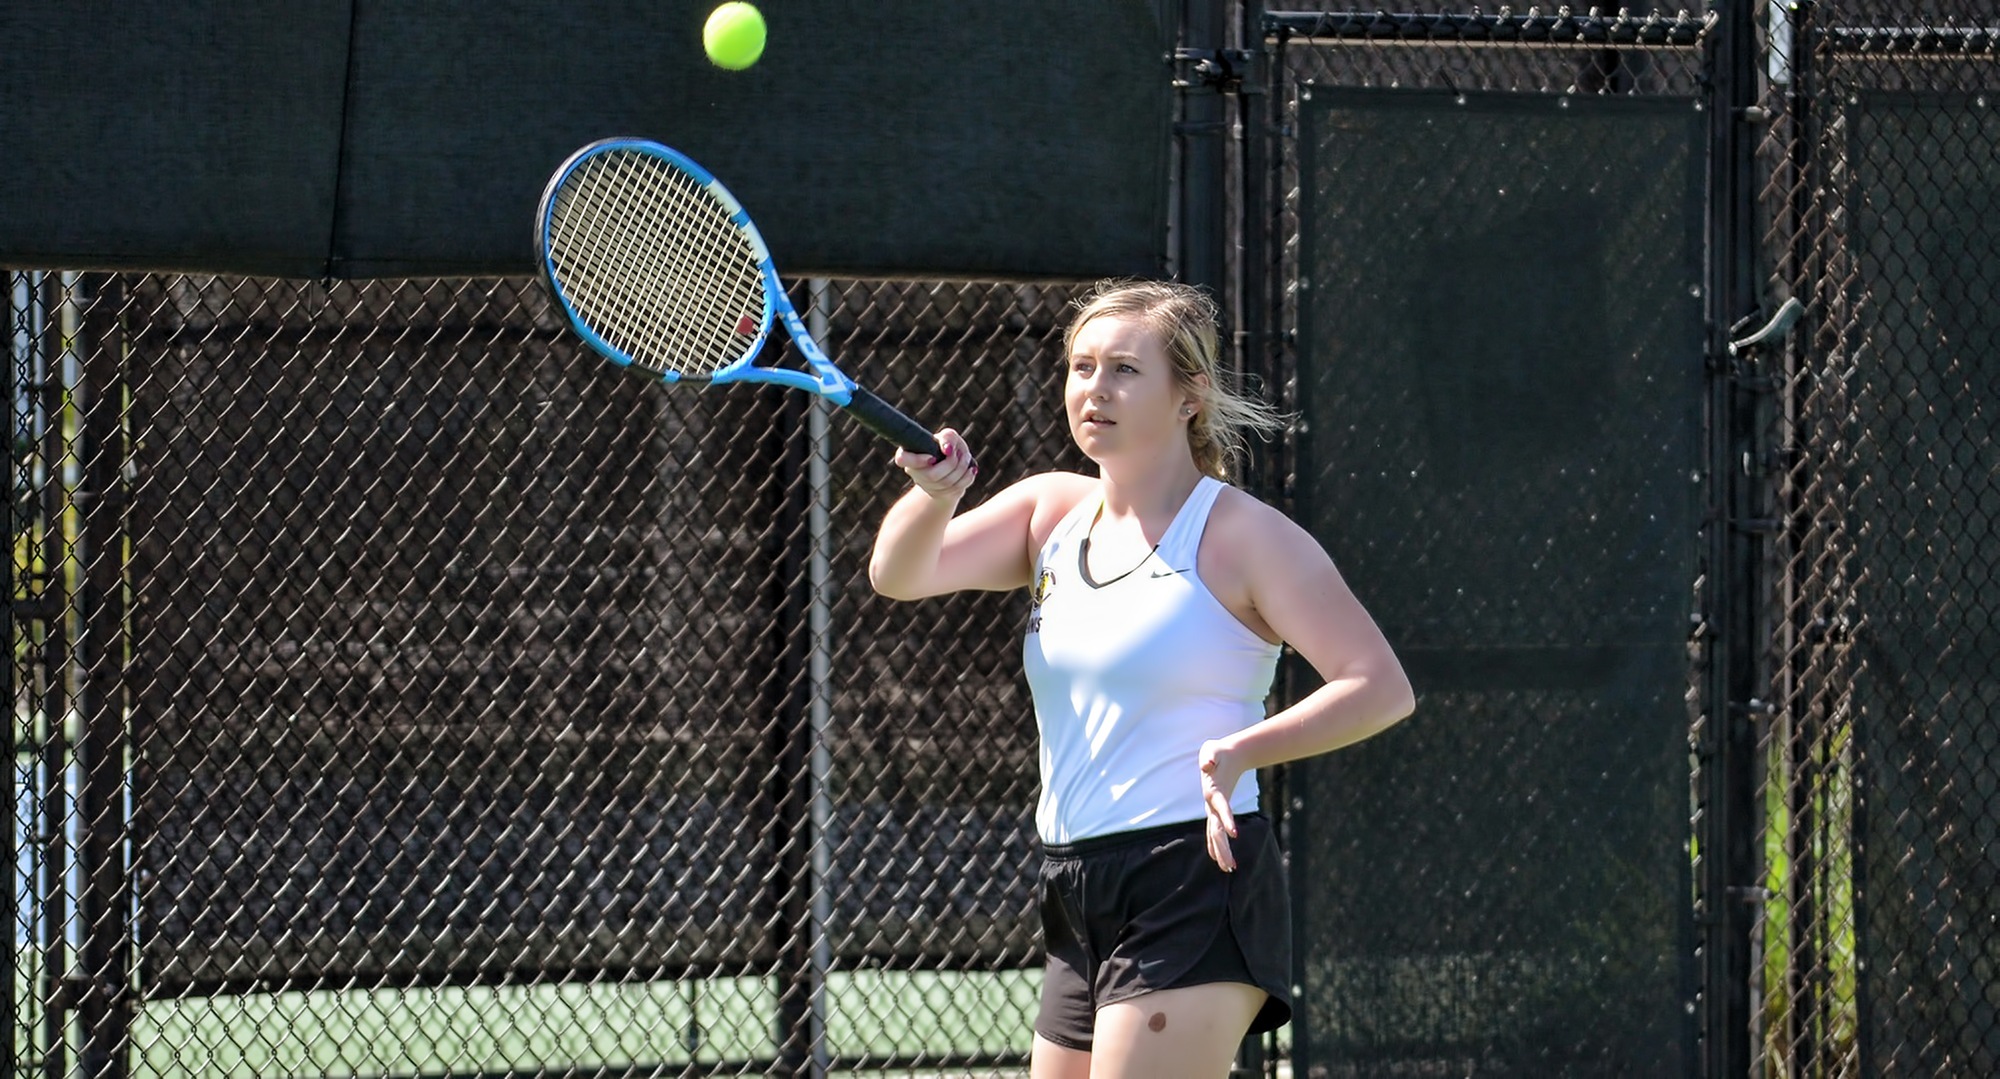 Sophomore Abby Westrum hits a forehand return at the USTA National Tennis Center. She recorded a win in her first singles match of the year and helped Concordia roll past Adrian. (Photo courtesy of Jeff Meyer)